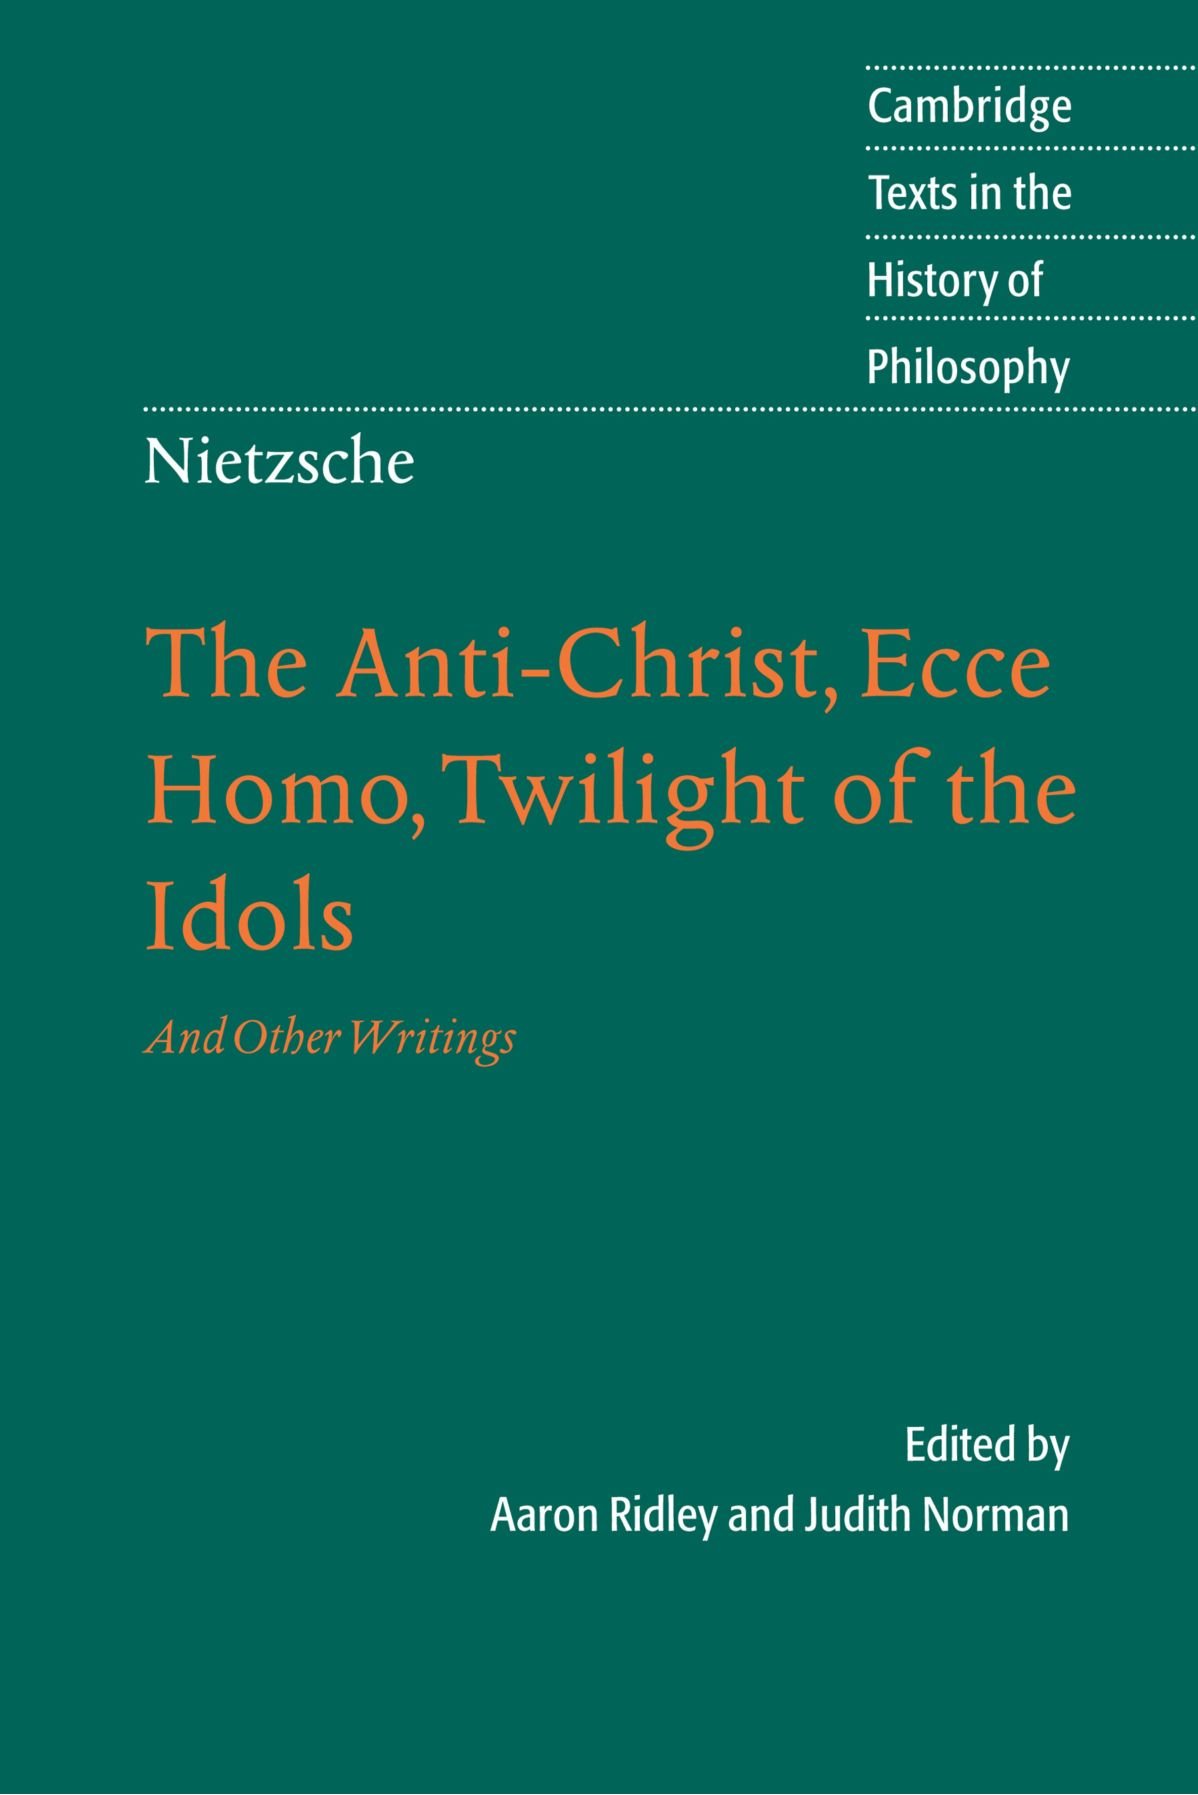 The Anti-Christ, Ecce Homo, Twilight of the Idols & Other Writings